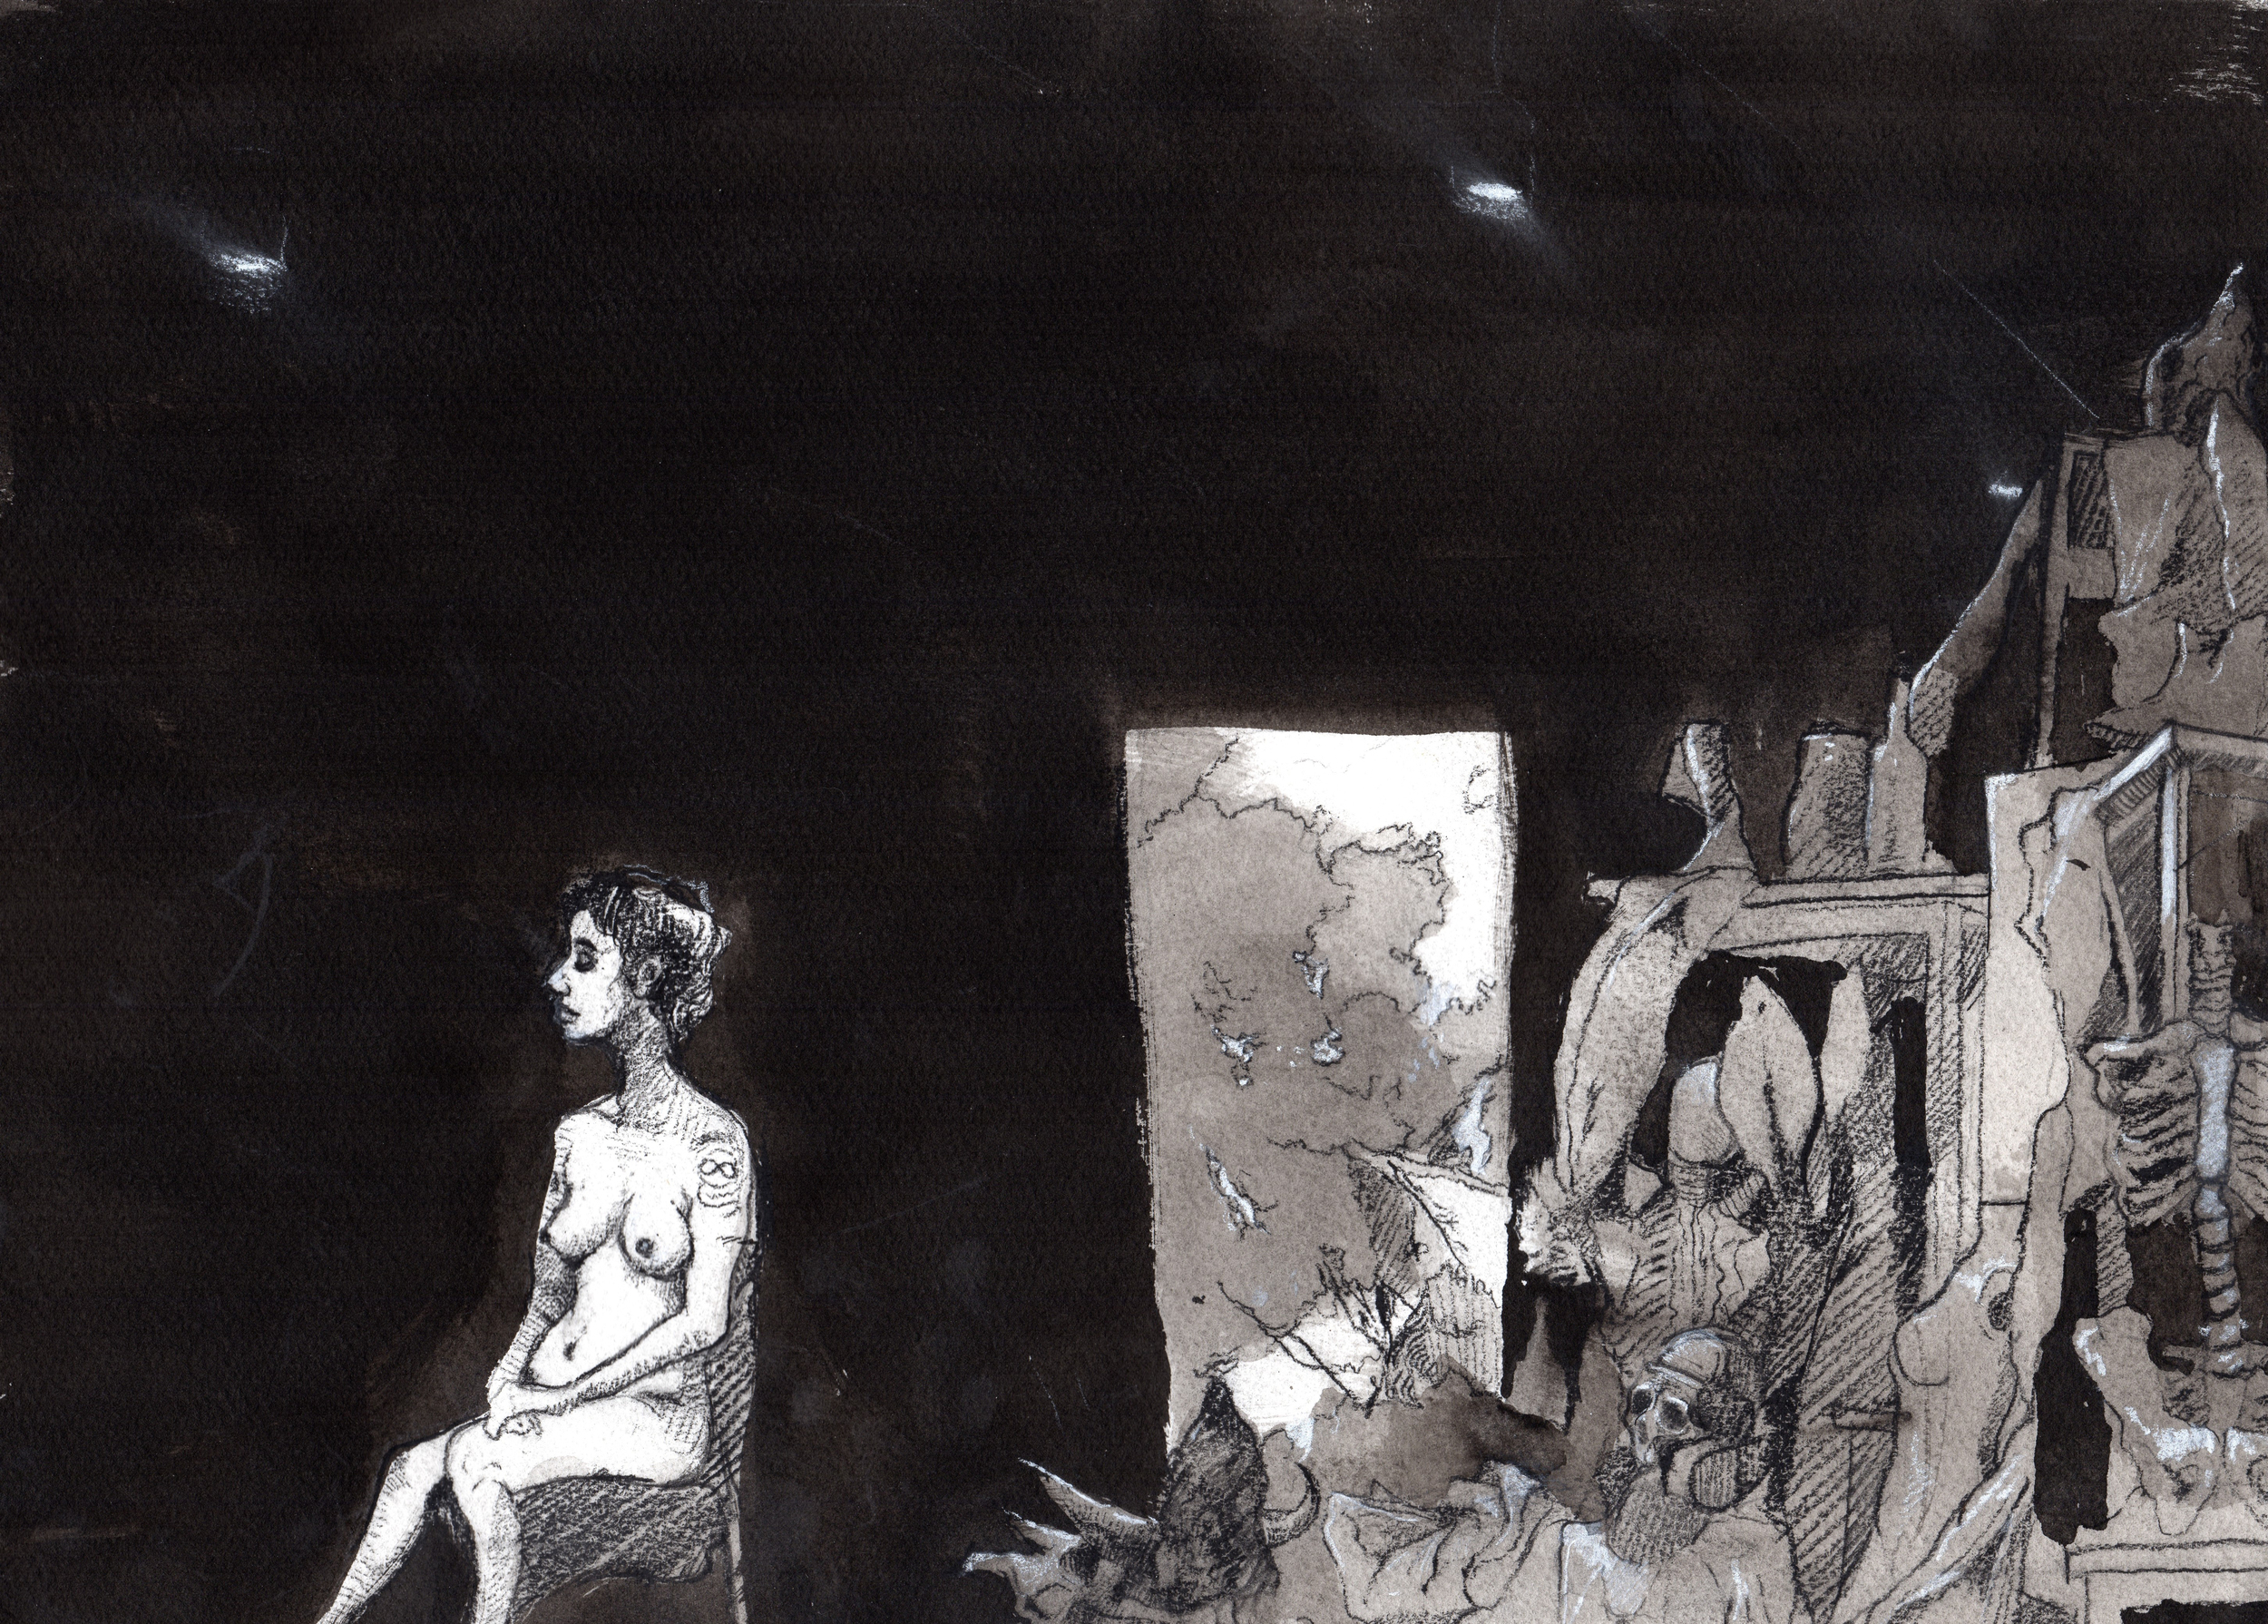    All the gods we loved  . 2013. 15 x 10 inches. Ink wash on paper. 